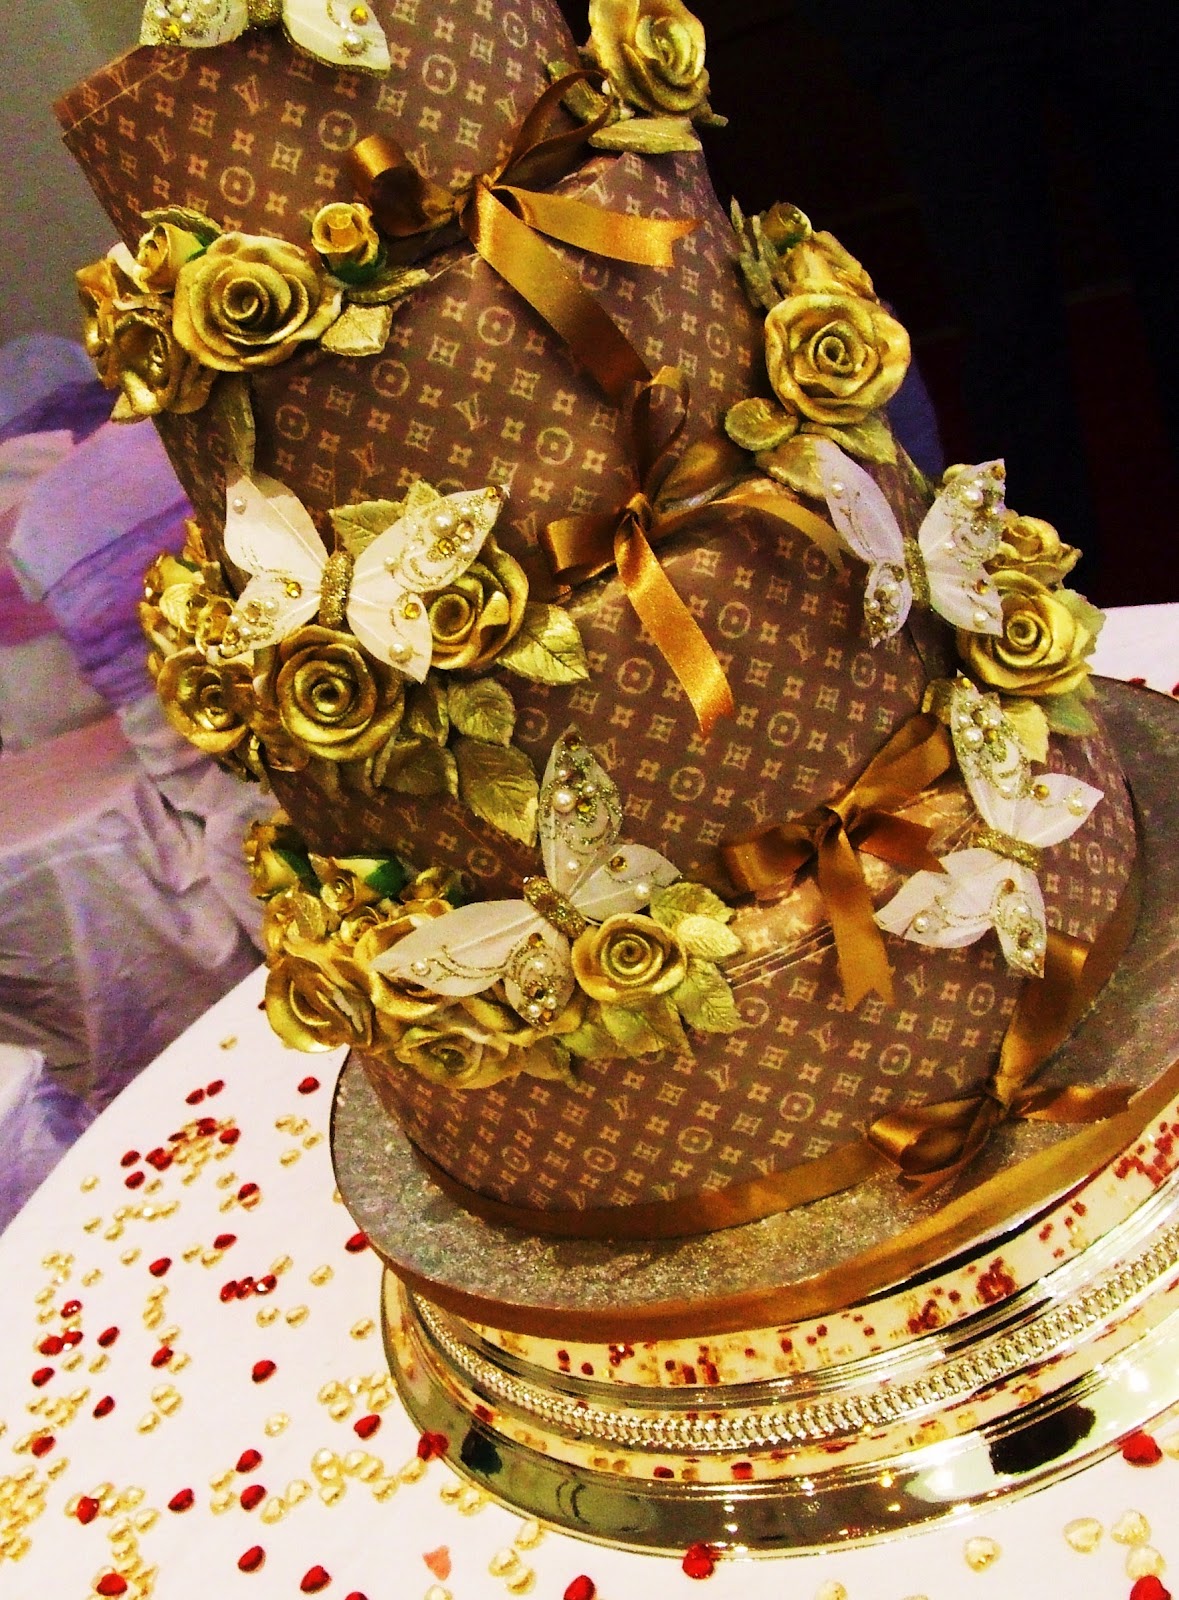 1906 - Louis Vuitton in 3 Tiers - Wedding Cakes, Fresh Bakery